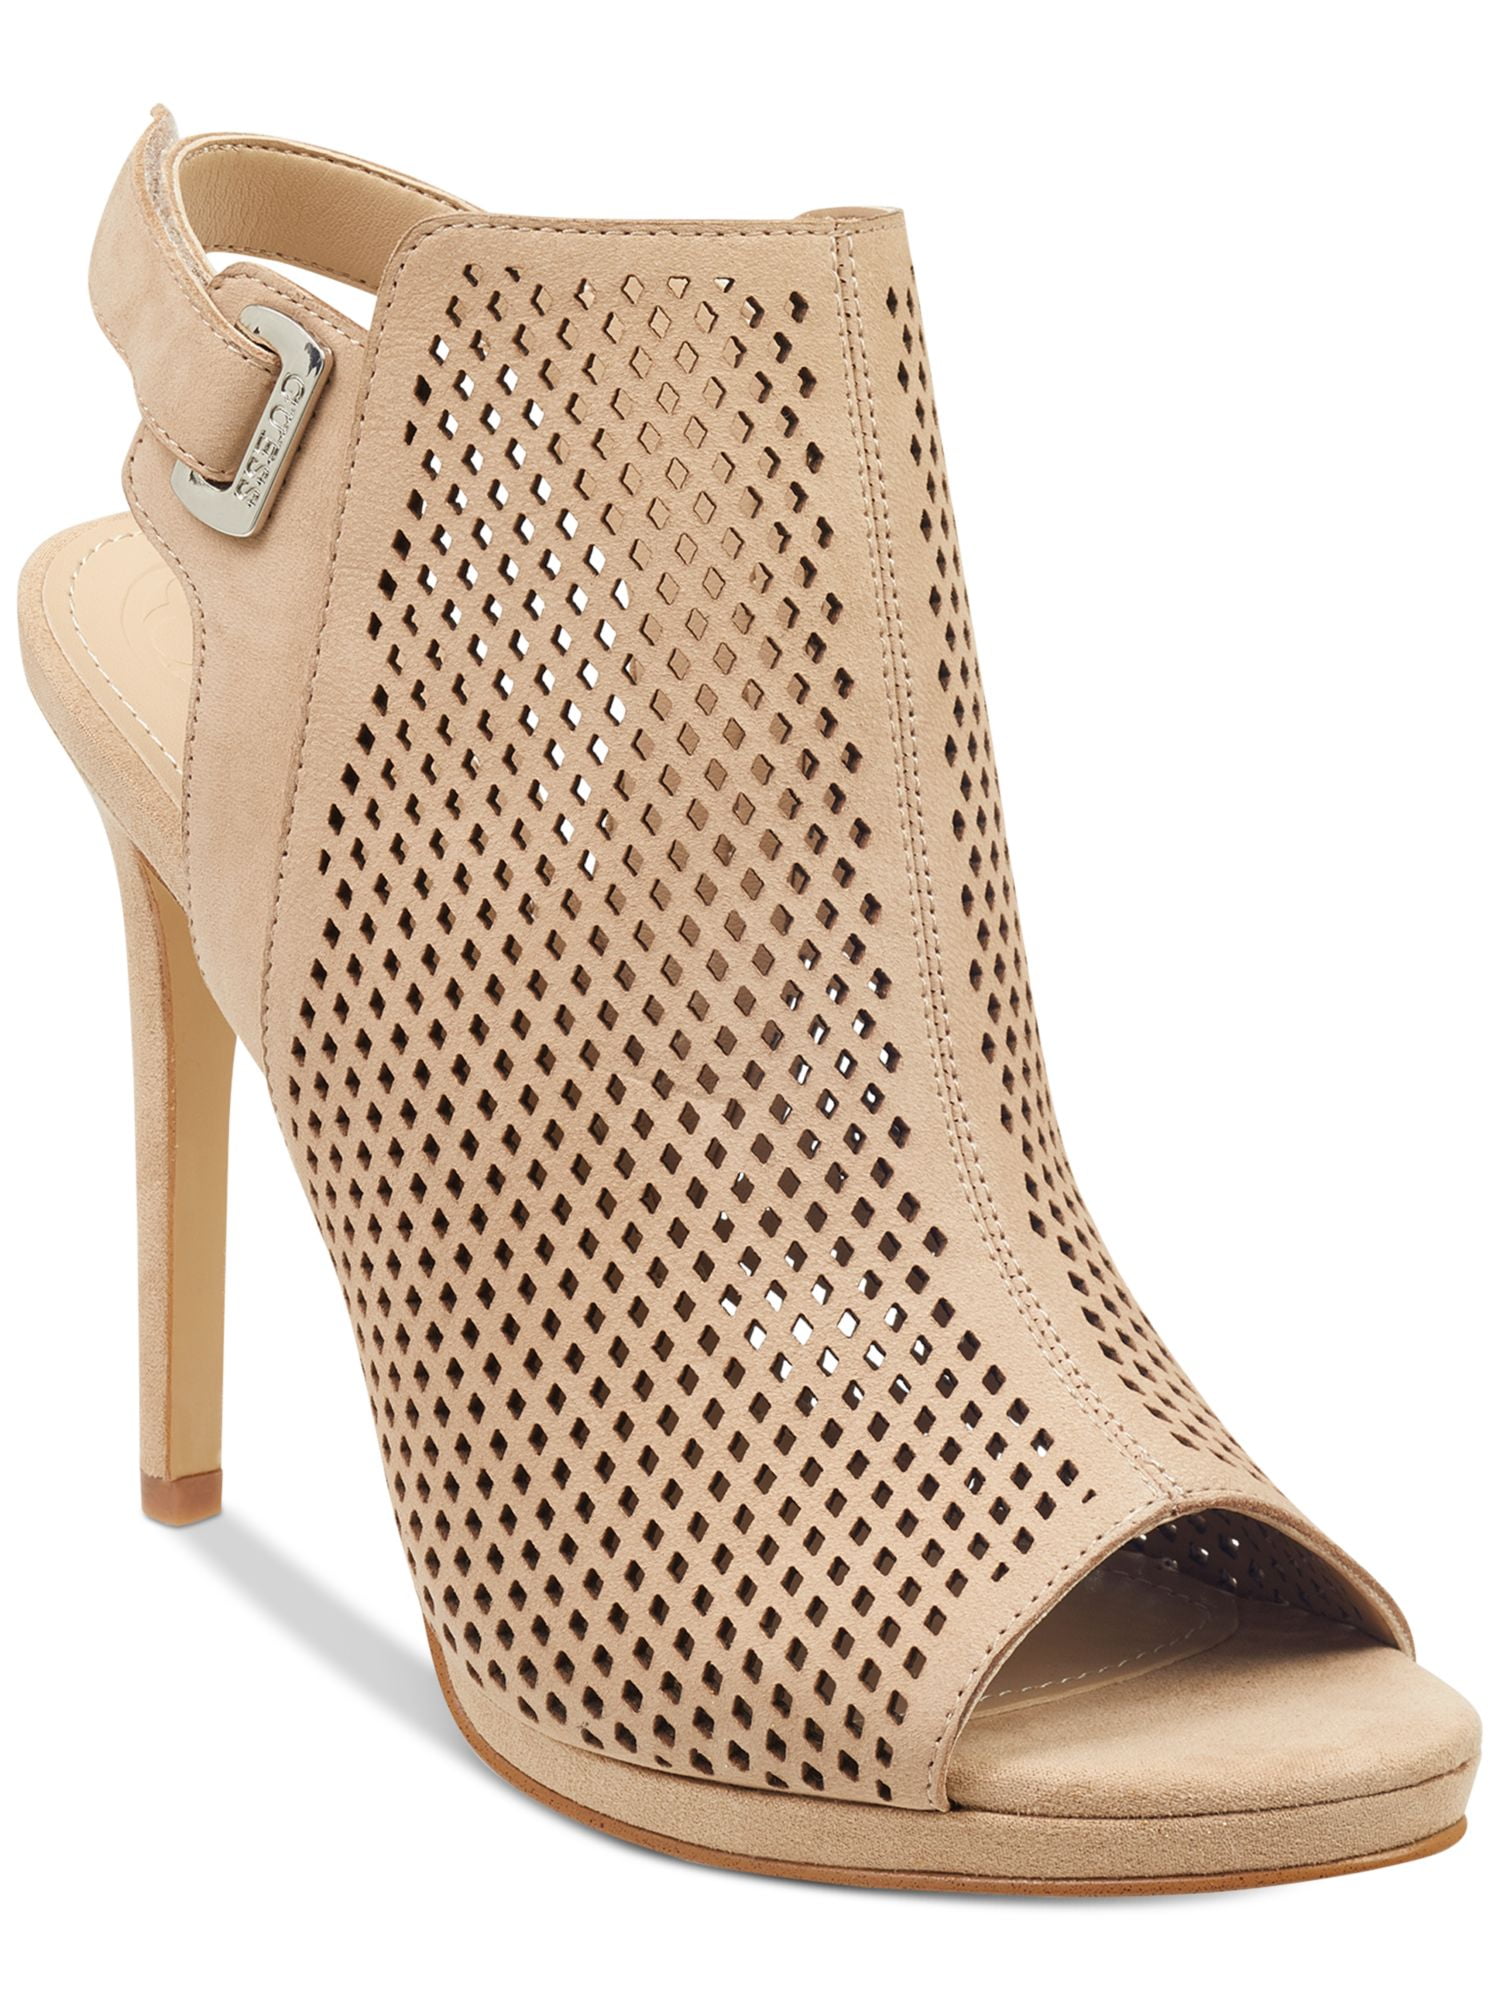 GUESS Womens Light Natural Beige Perforated Padded Aubria Round Toe  Stiletto Leather Dress Slingback Sandal 10 M